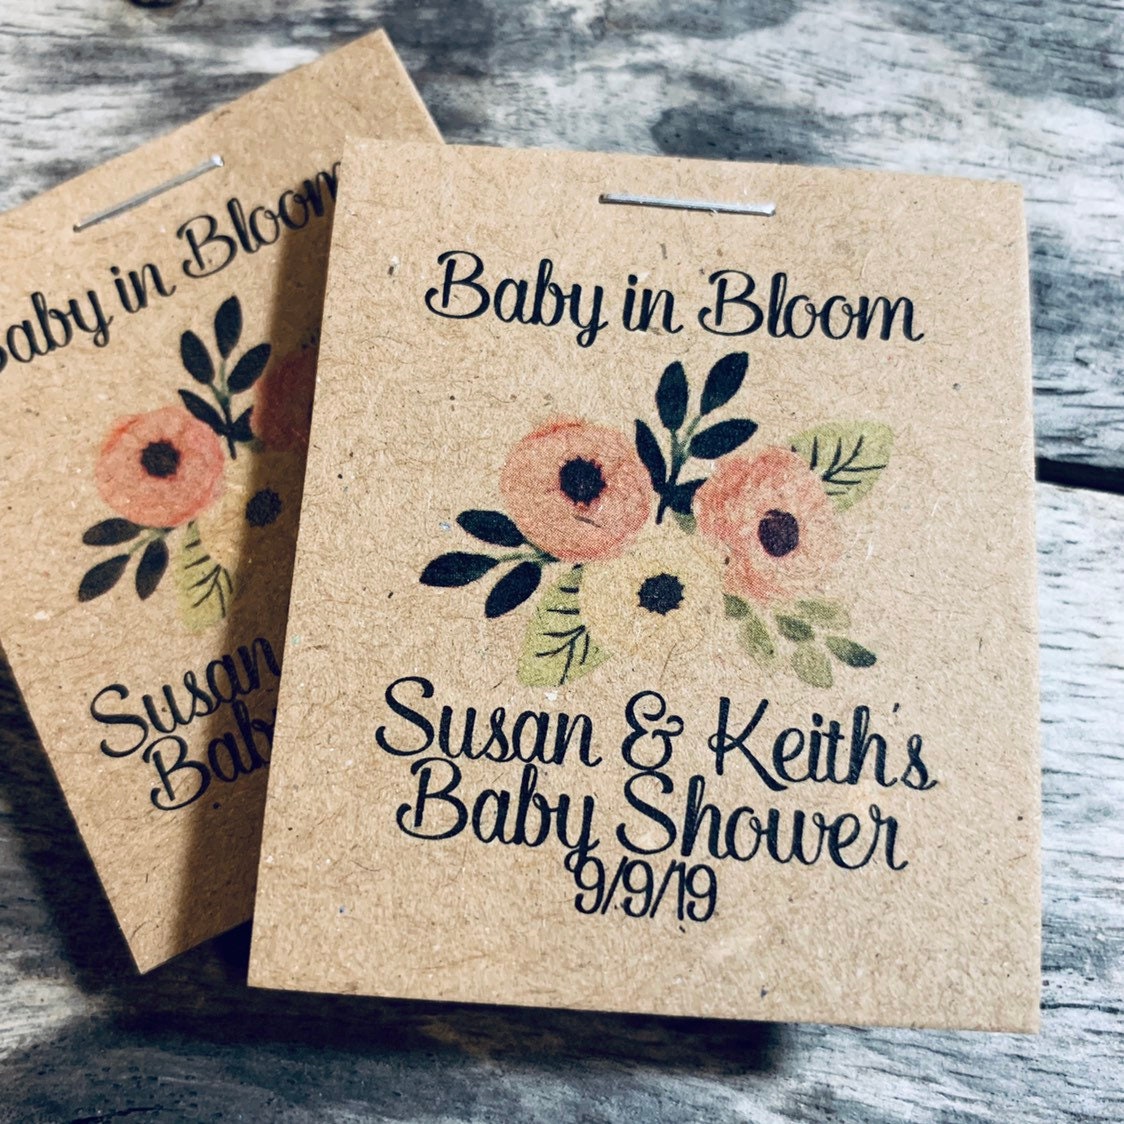 ZLKAPT Plant These Seeds and Watch Them Bloom Baby Shower Favor Sign Chic Seed  Packet Favors Baby Shower Seed Packets Sign Baby Shower Seed Bombs Sign  8x10 Inches No Frame - Yahoo